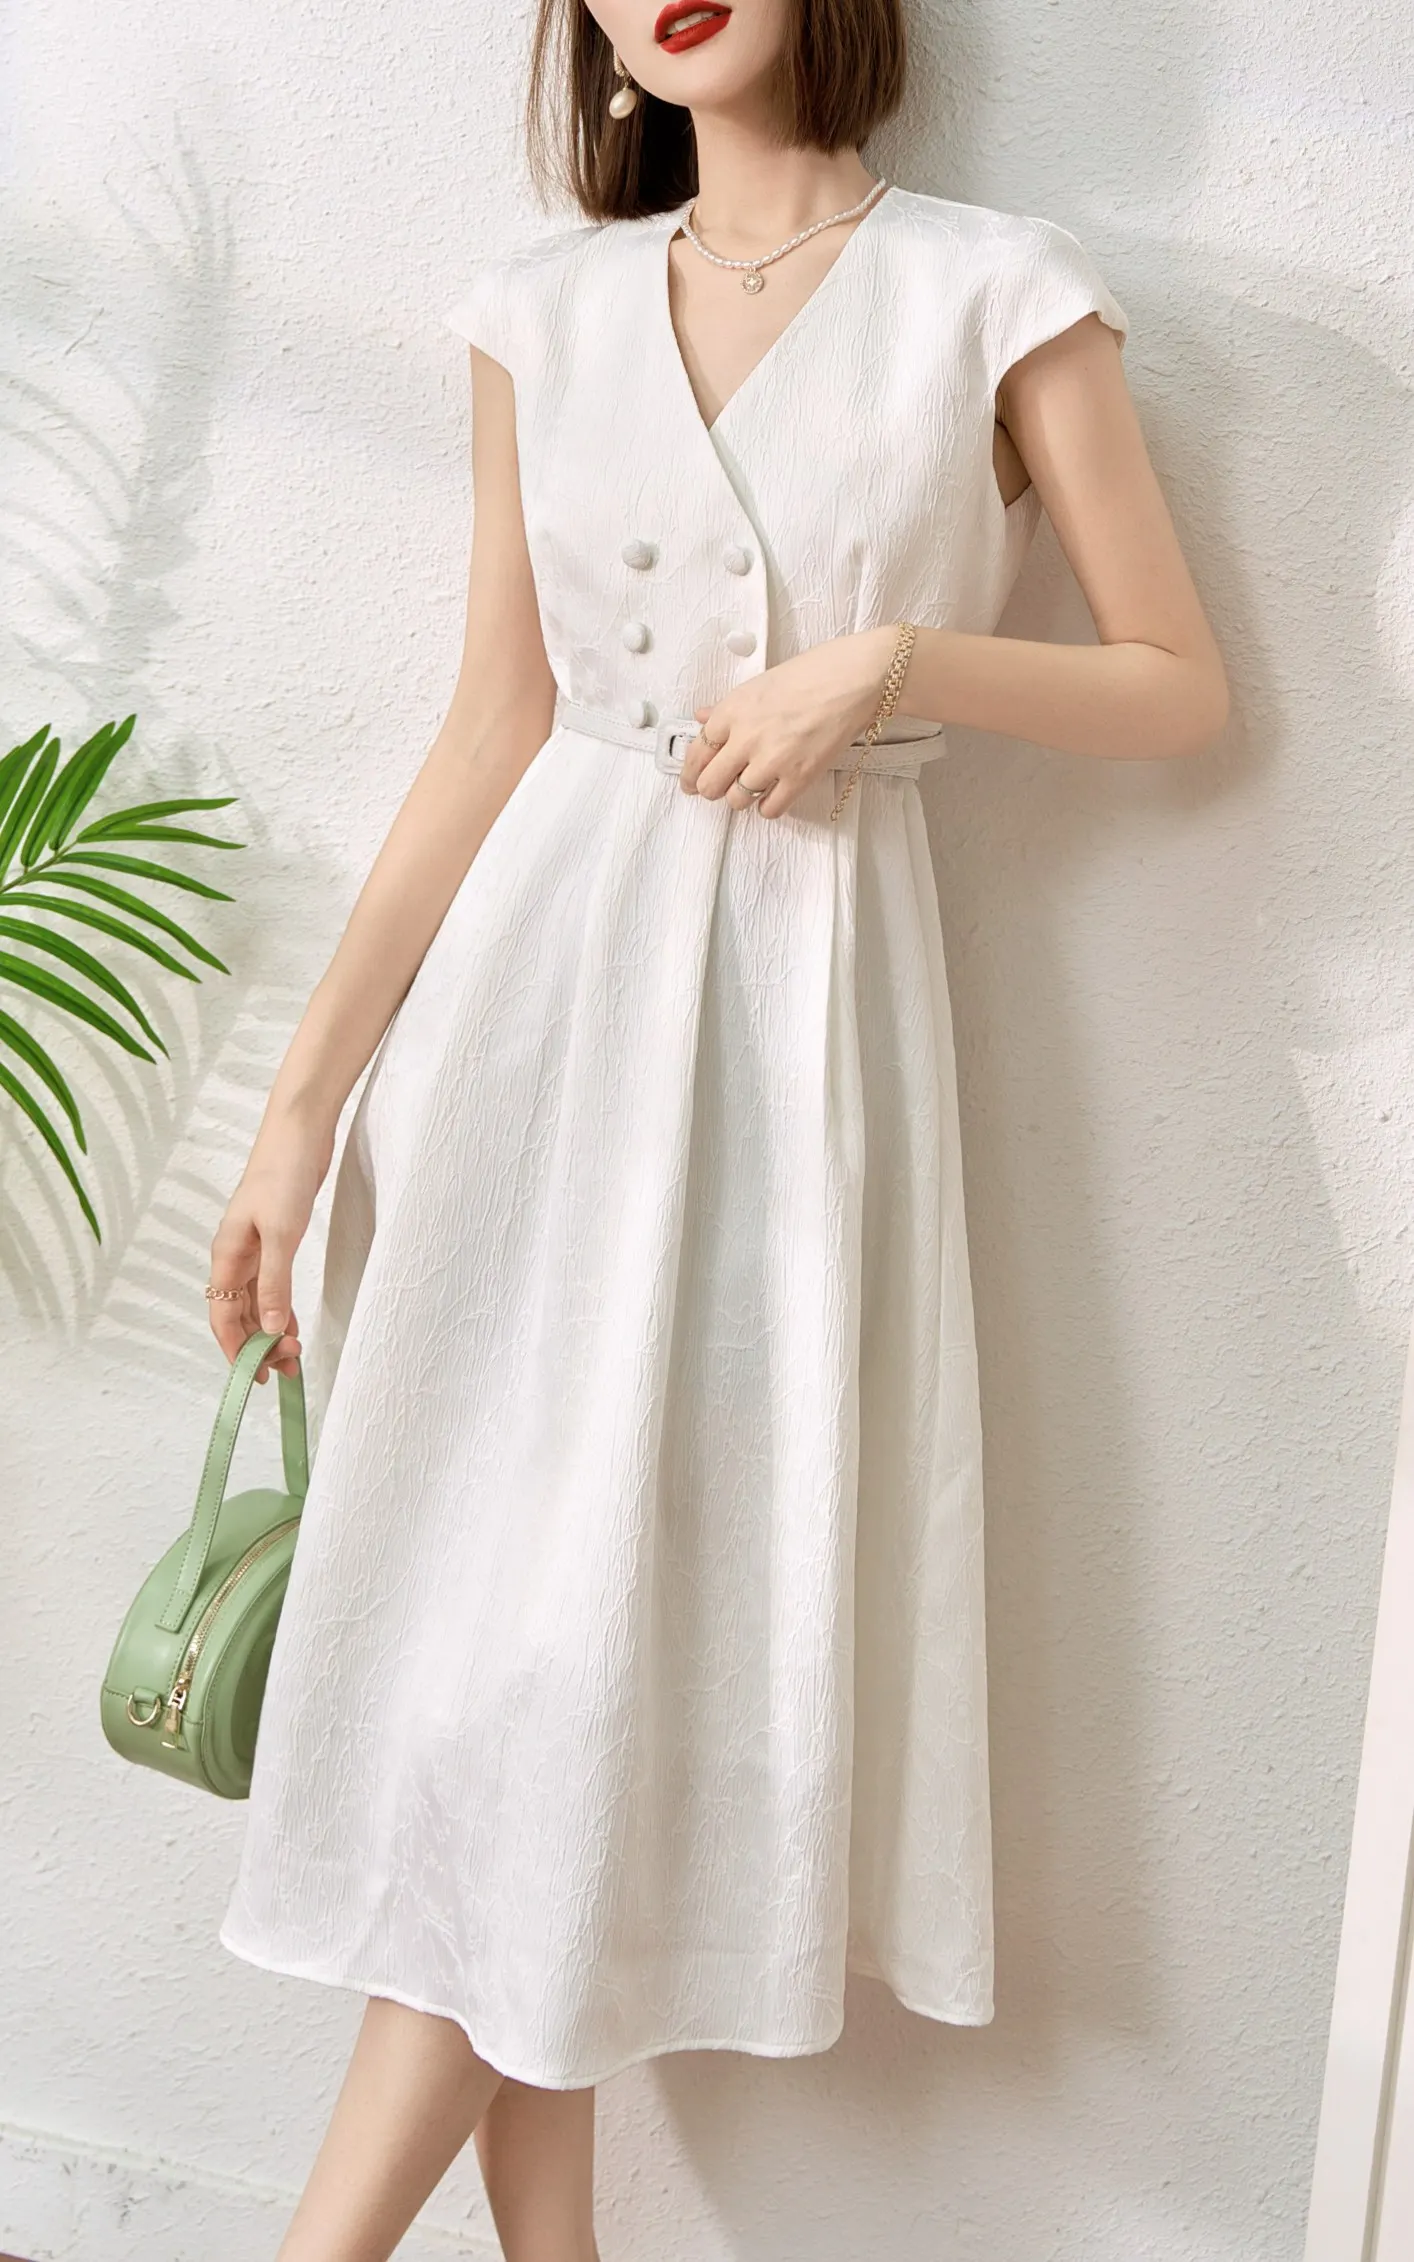 2023 spring and summer women's clothing fashion new Jacquard Dress 0511